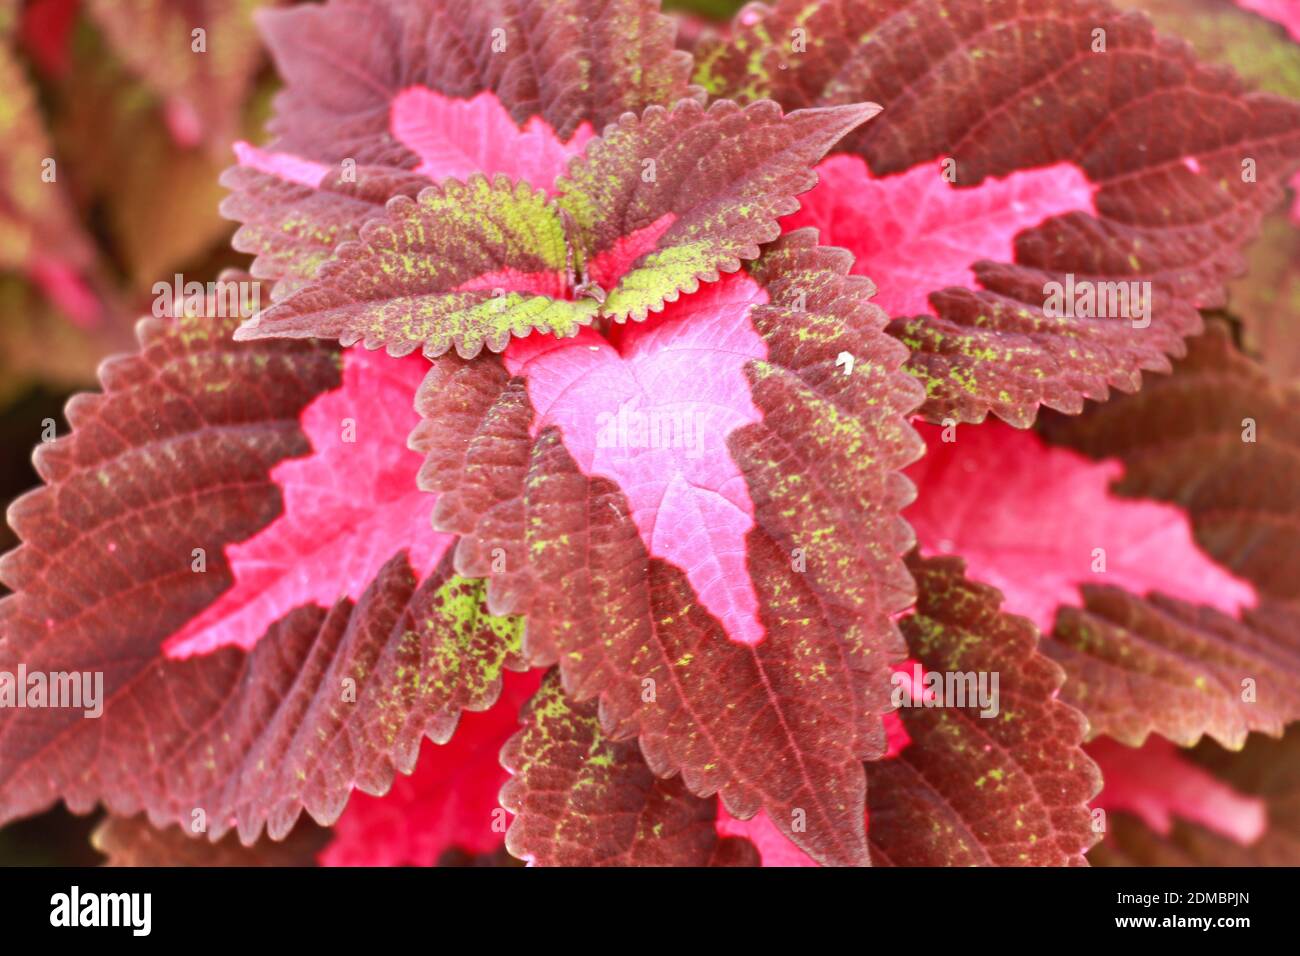 Pink leaved coleus plant called plectranthus scutellarioides. Coleus is a species of flowering plant in the family Lamiaceae, the mint or deadnettle Stock Photo